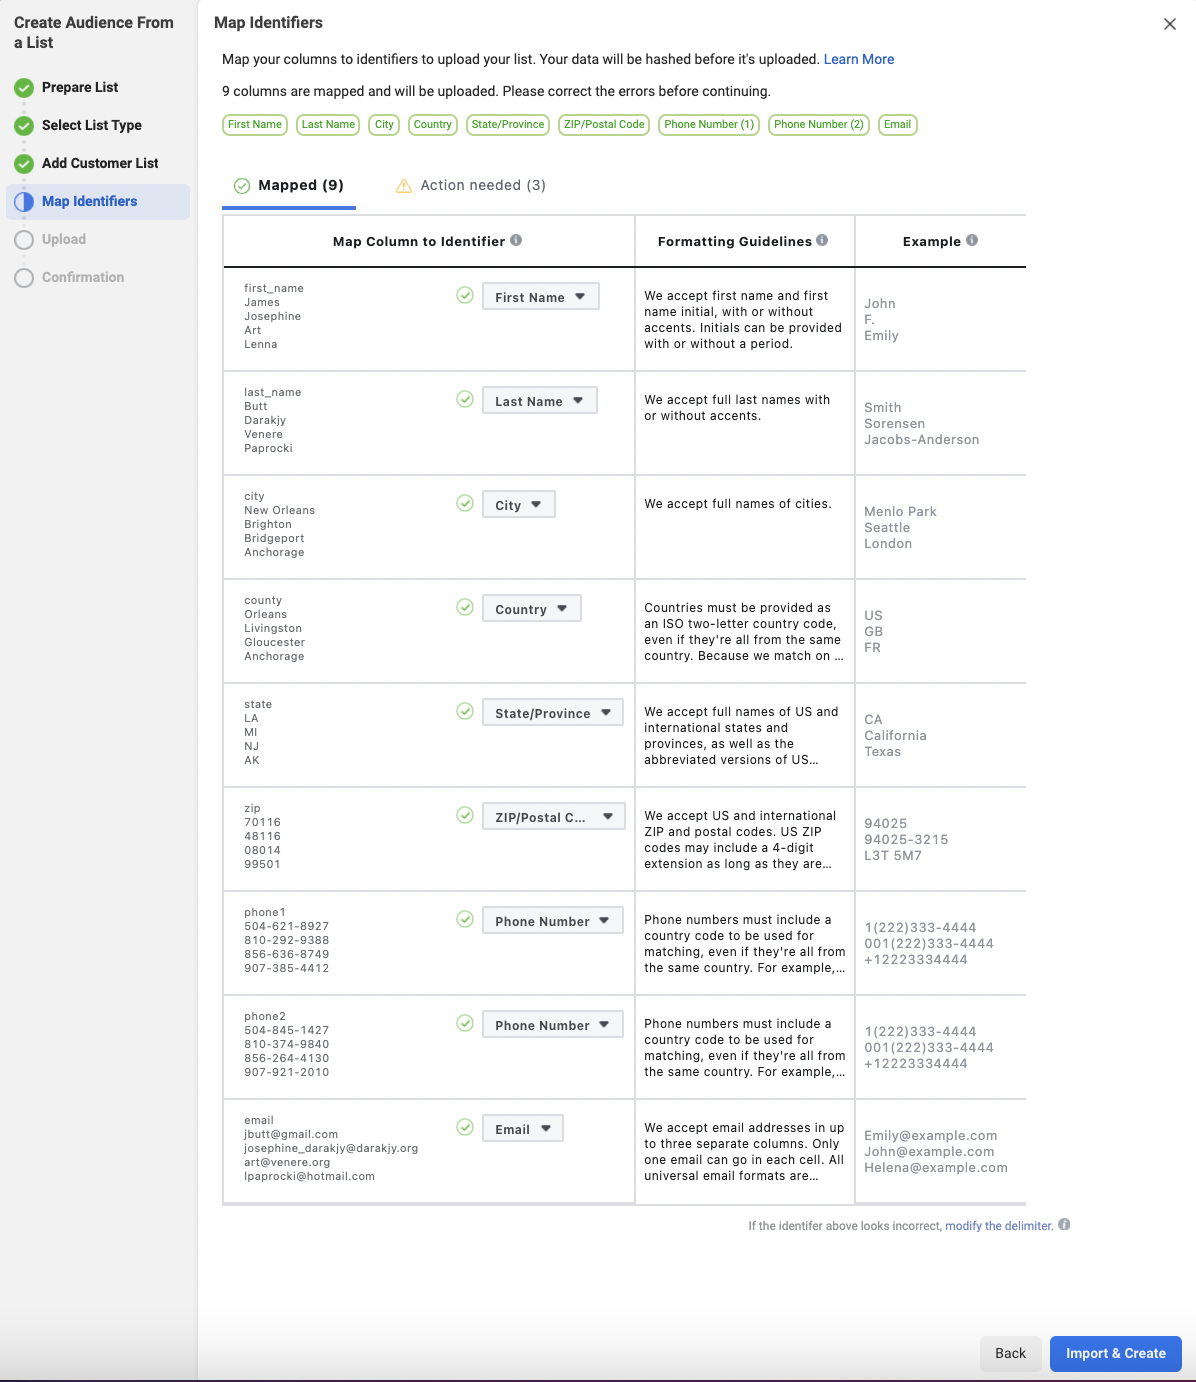 Map the identifiers from a Customer List upload in Facebook Custom Audience